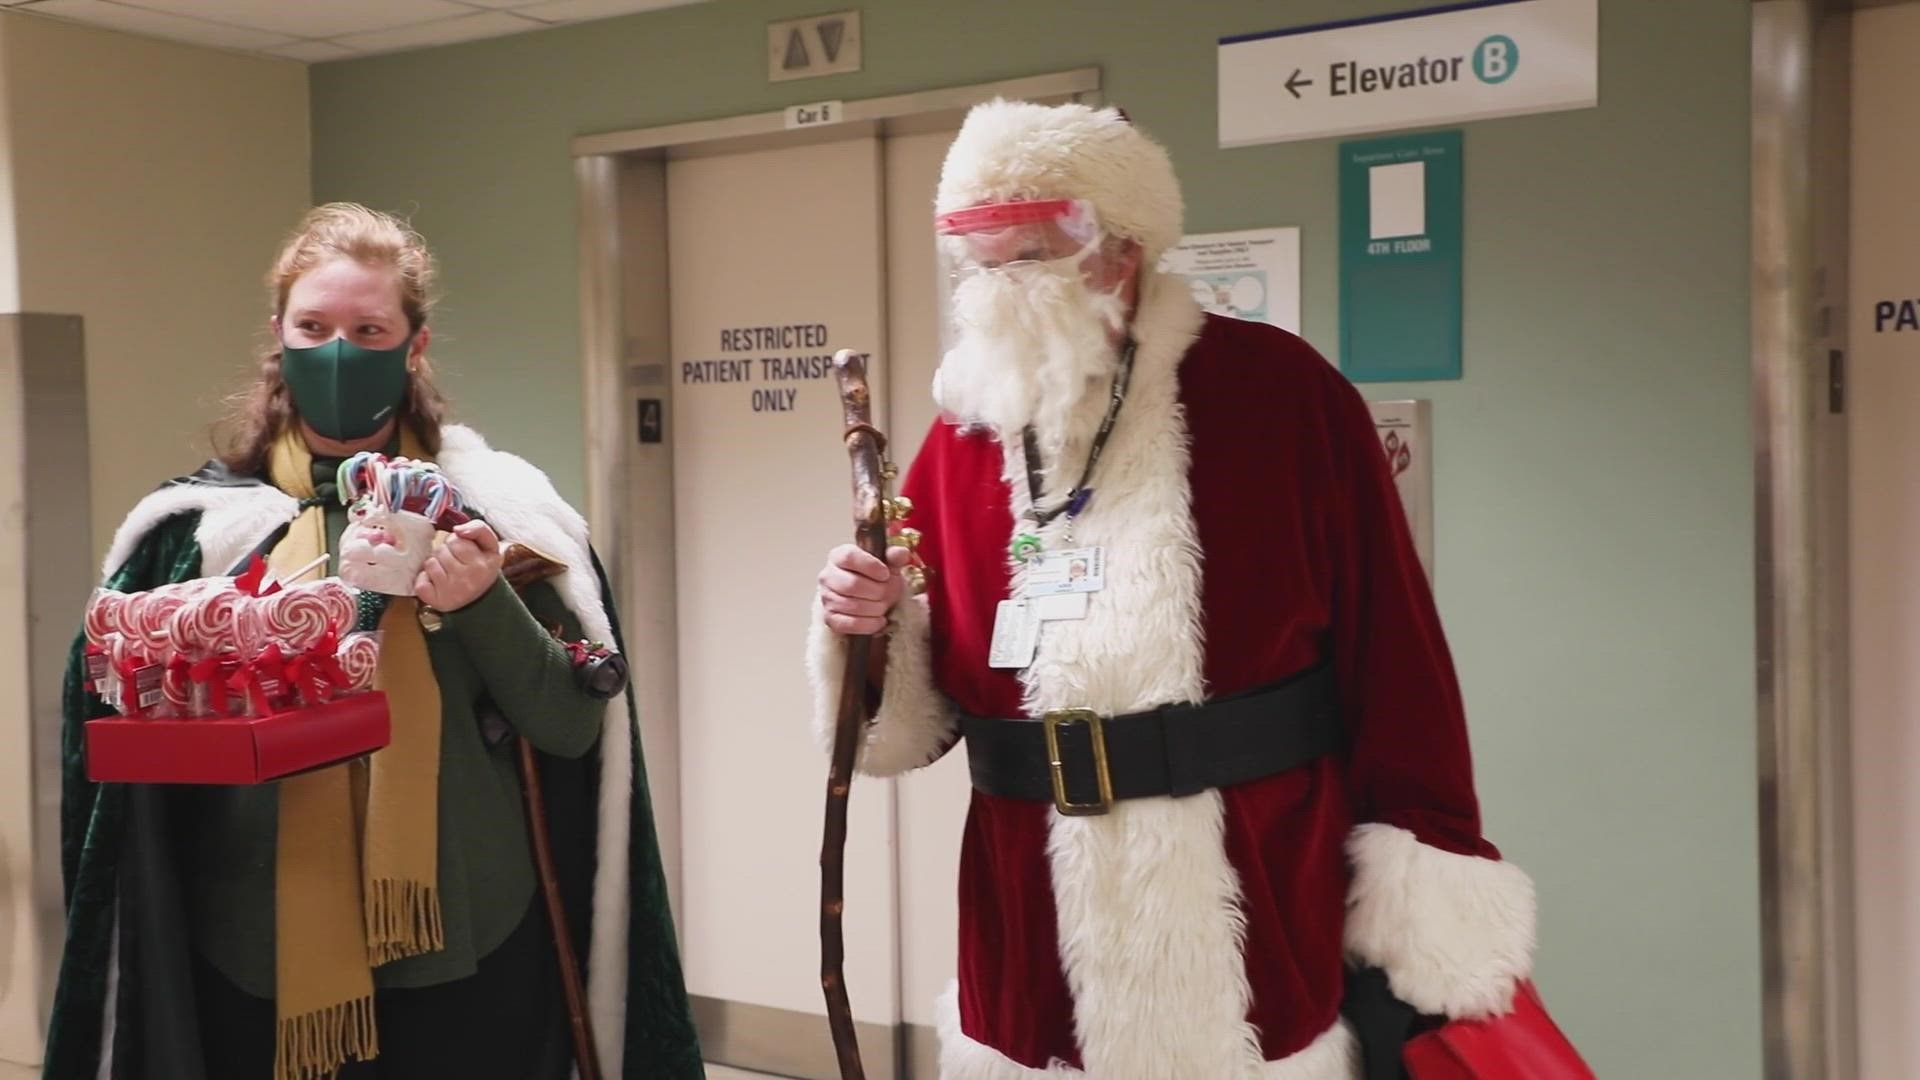 Watch as Santa brings some holiday cheer to the kids at MetroHealth Cleveland.